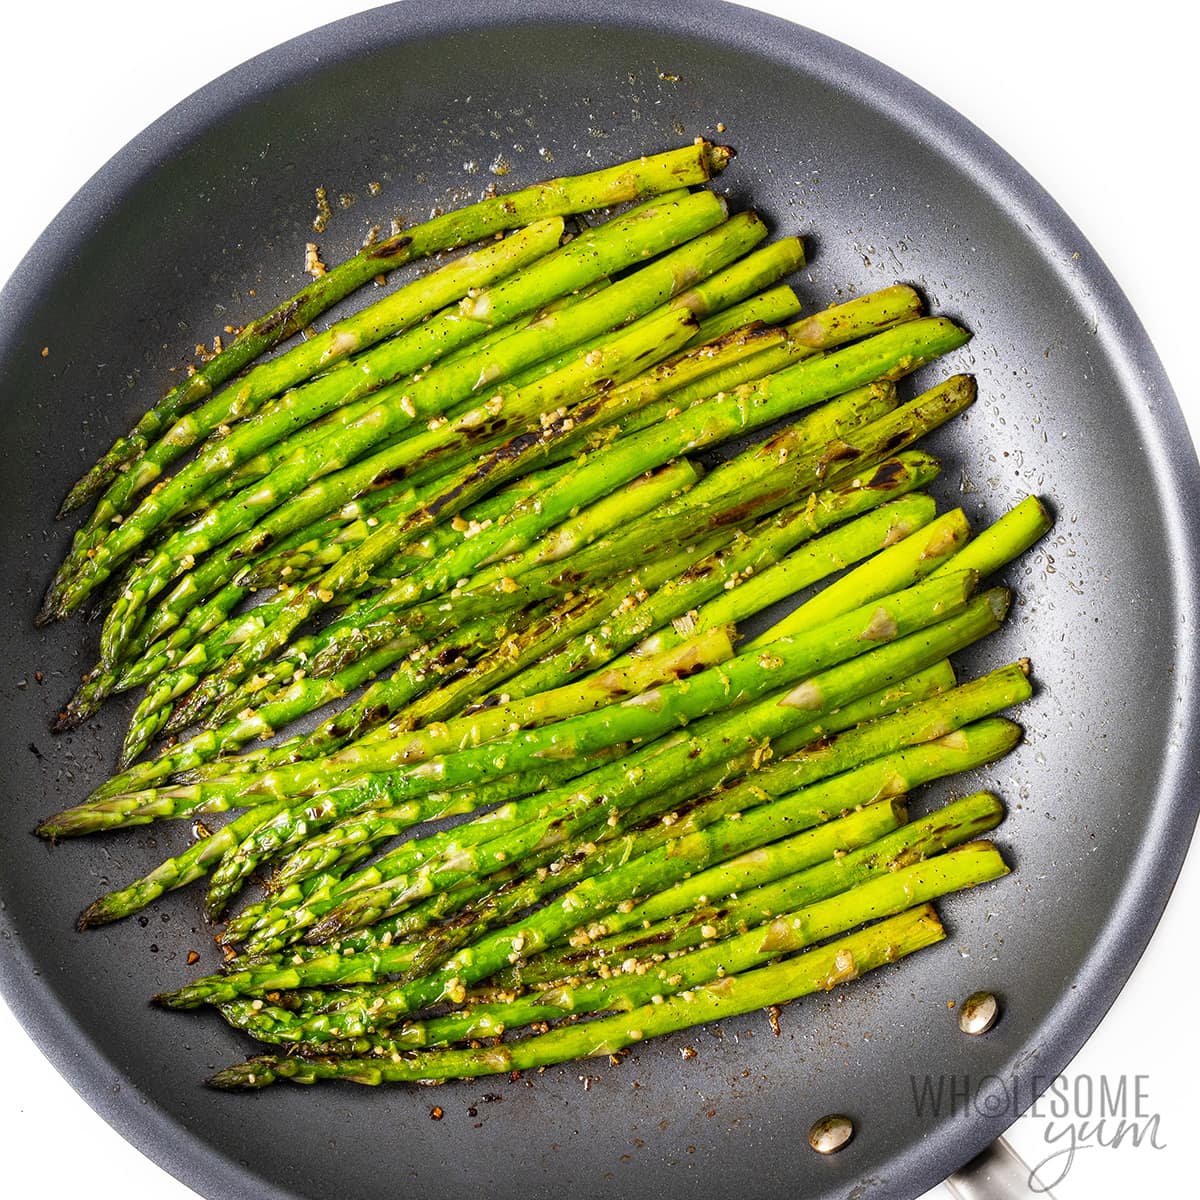 Sauteed asparagus in a skillet.